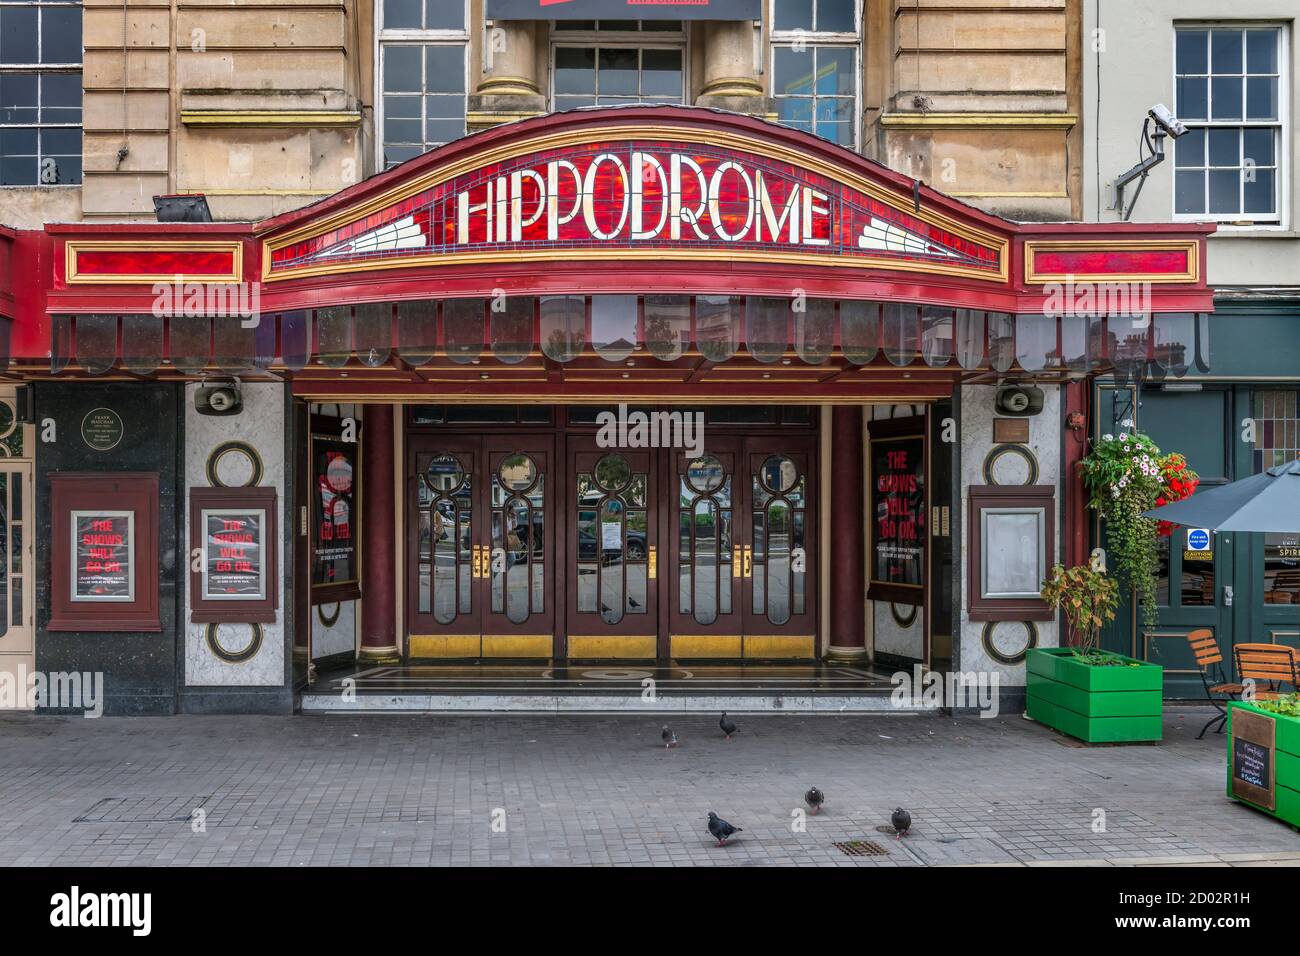 Although presently closed due to the Covid 19 pandemic, The Bristol Hippodrome is a theatre located in The Centre, Bristol, England, United Kingdom wi Stock Photo